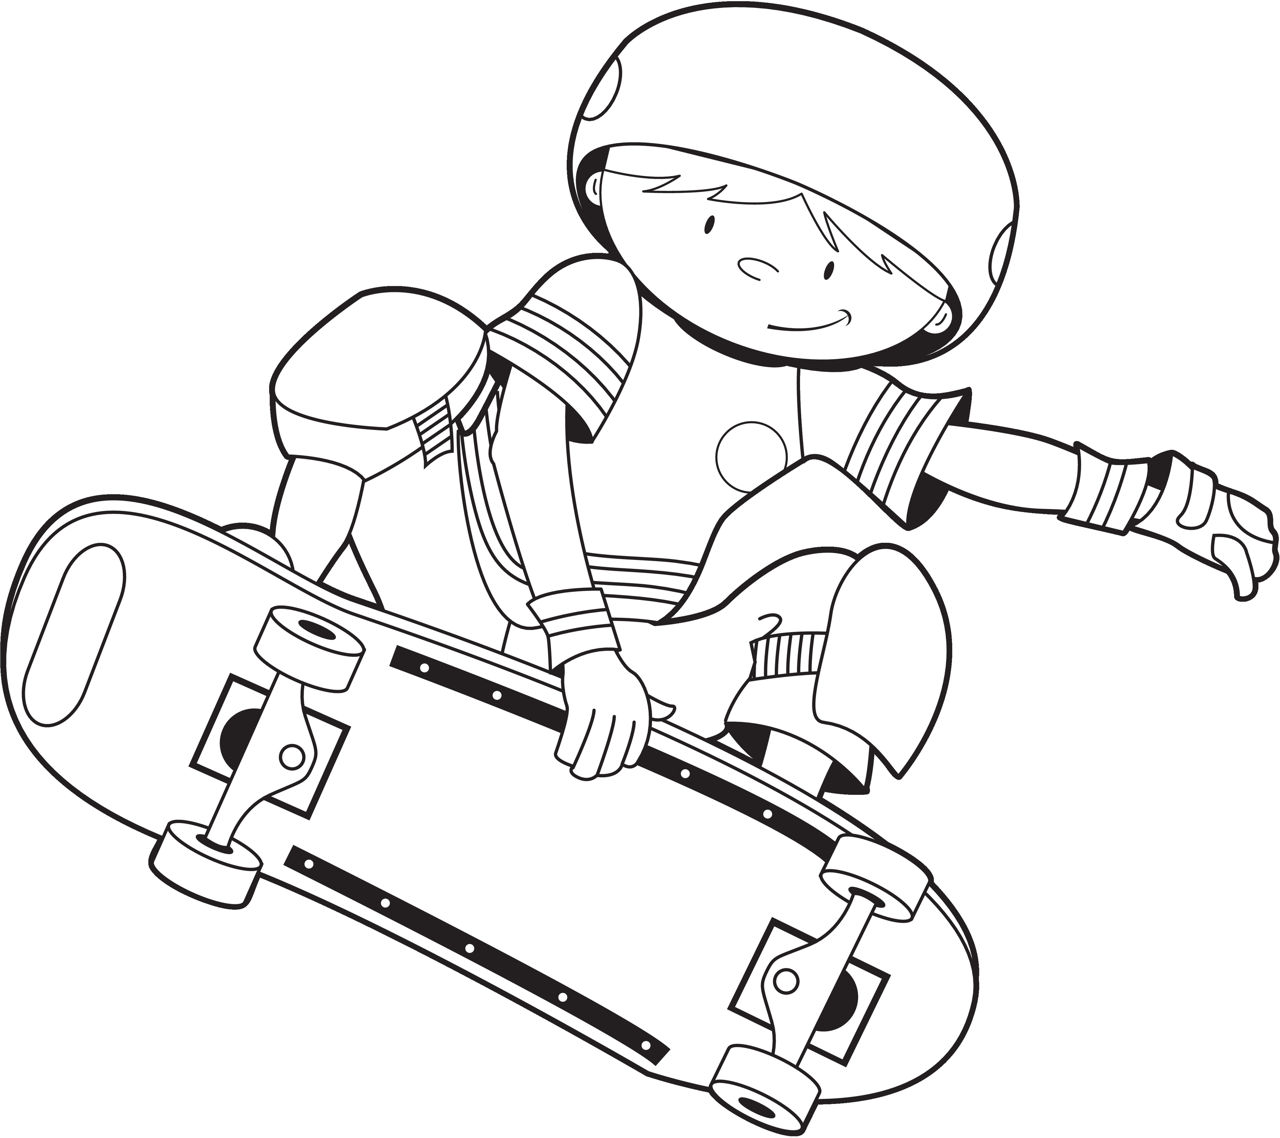 Hudyarchuleta: Cool Coloring Pages For Boys